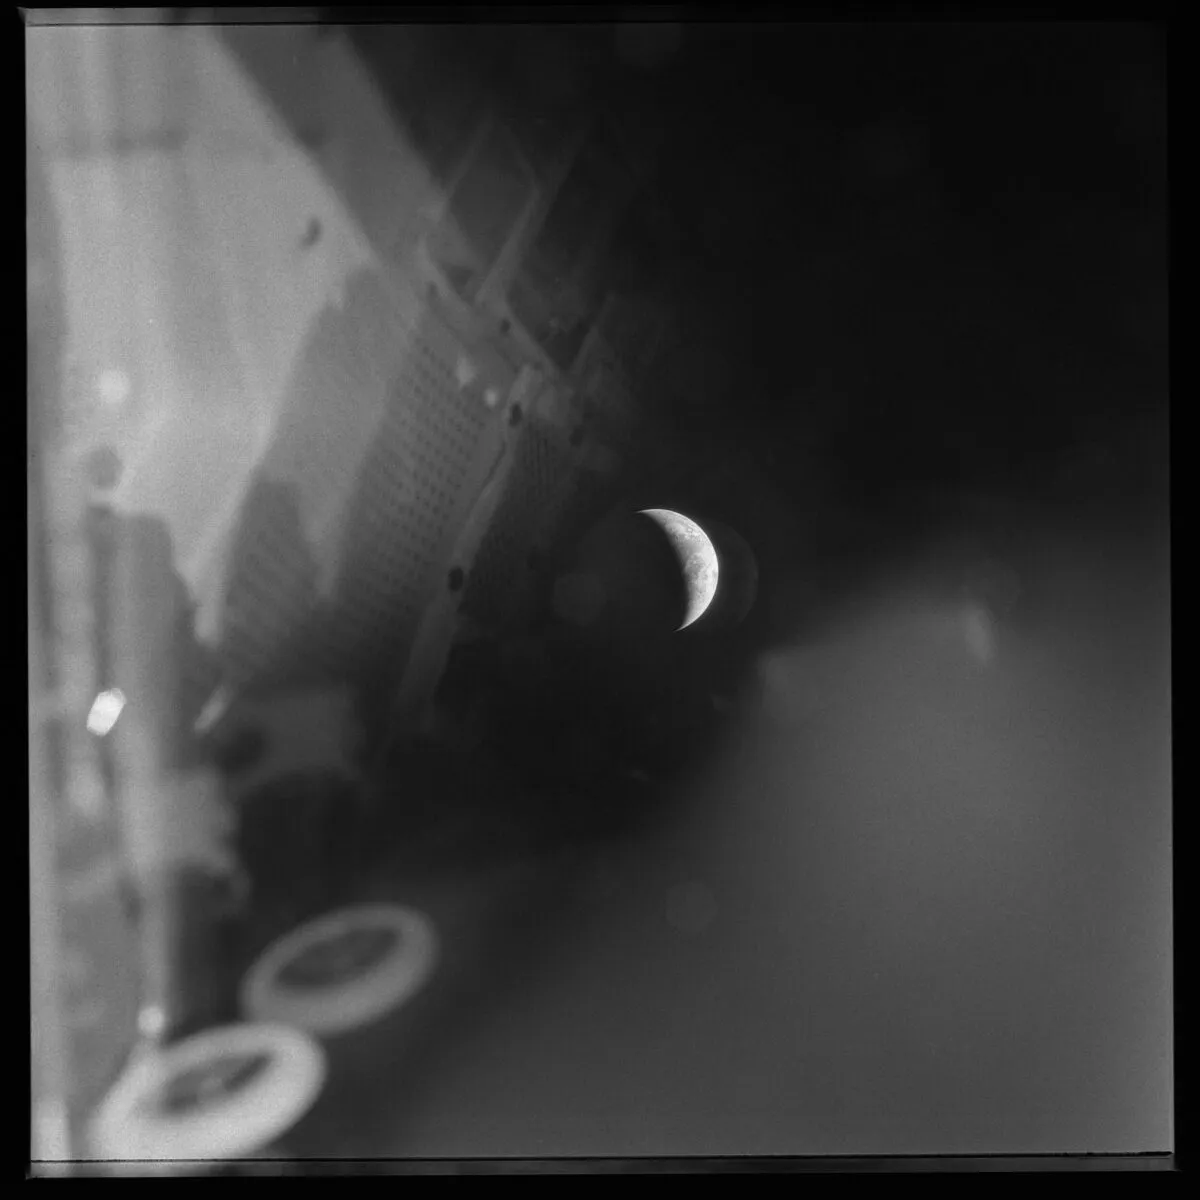 A crescent Earth surrounded by reflections of the Lunar Module during Apollo 13. The Lunar Module became the Apollo 13 astronauts' only hope of survival once the Command Module lost power. This image was captured 3 days after the explosion on 17 April 1970. Home must have seemed a very long way away. Credit: NASA / restored by Toby Ord